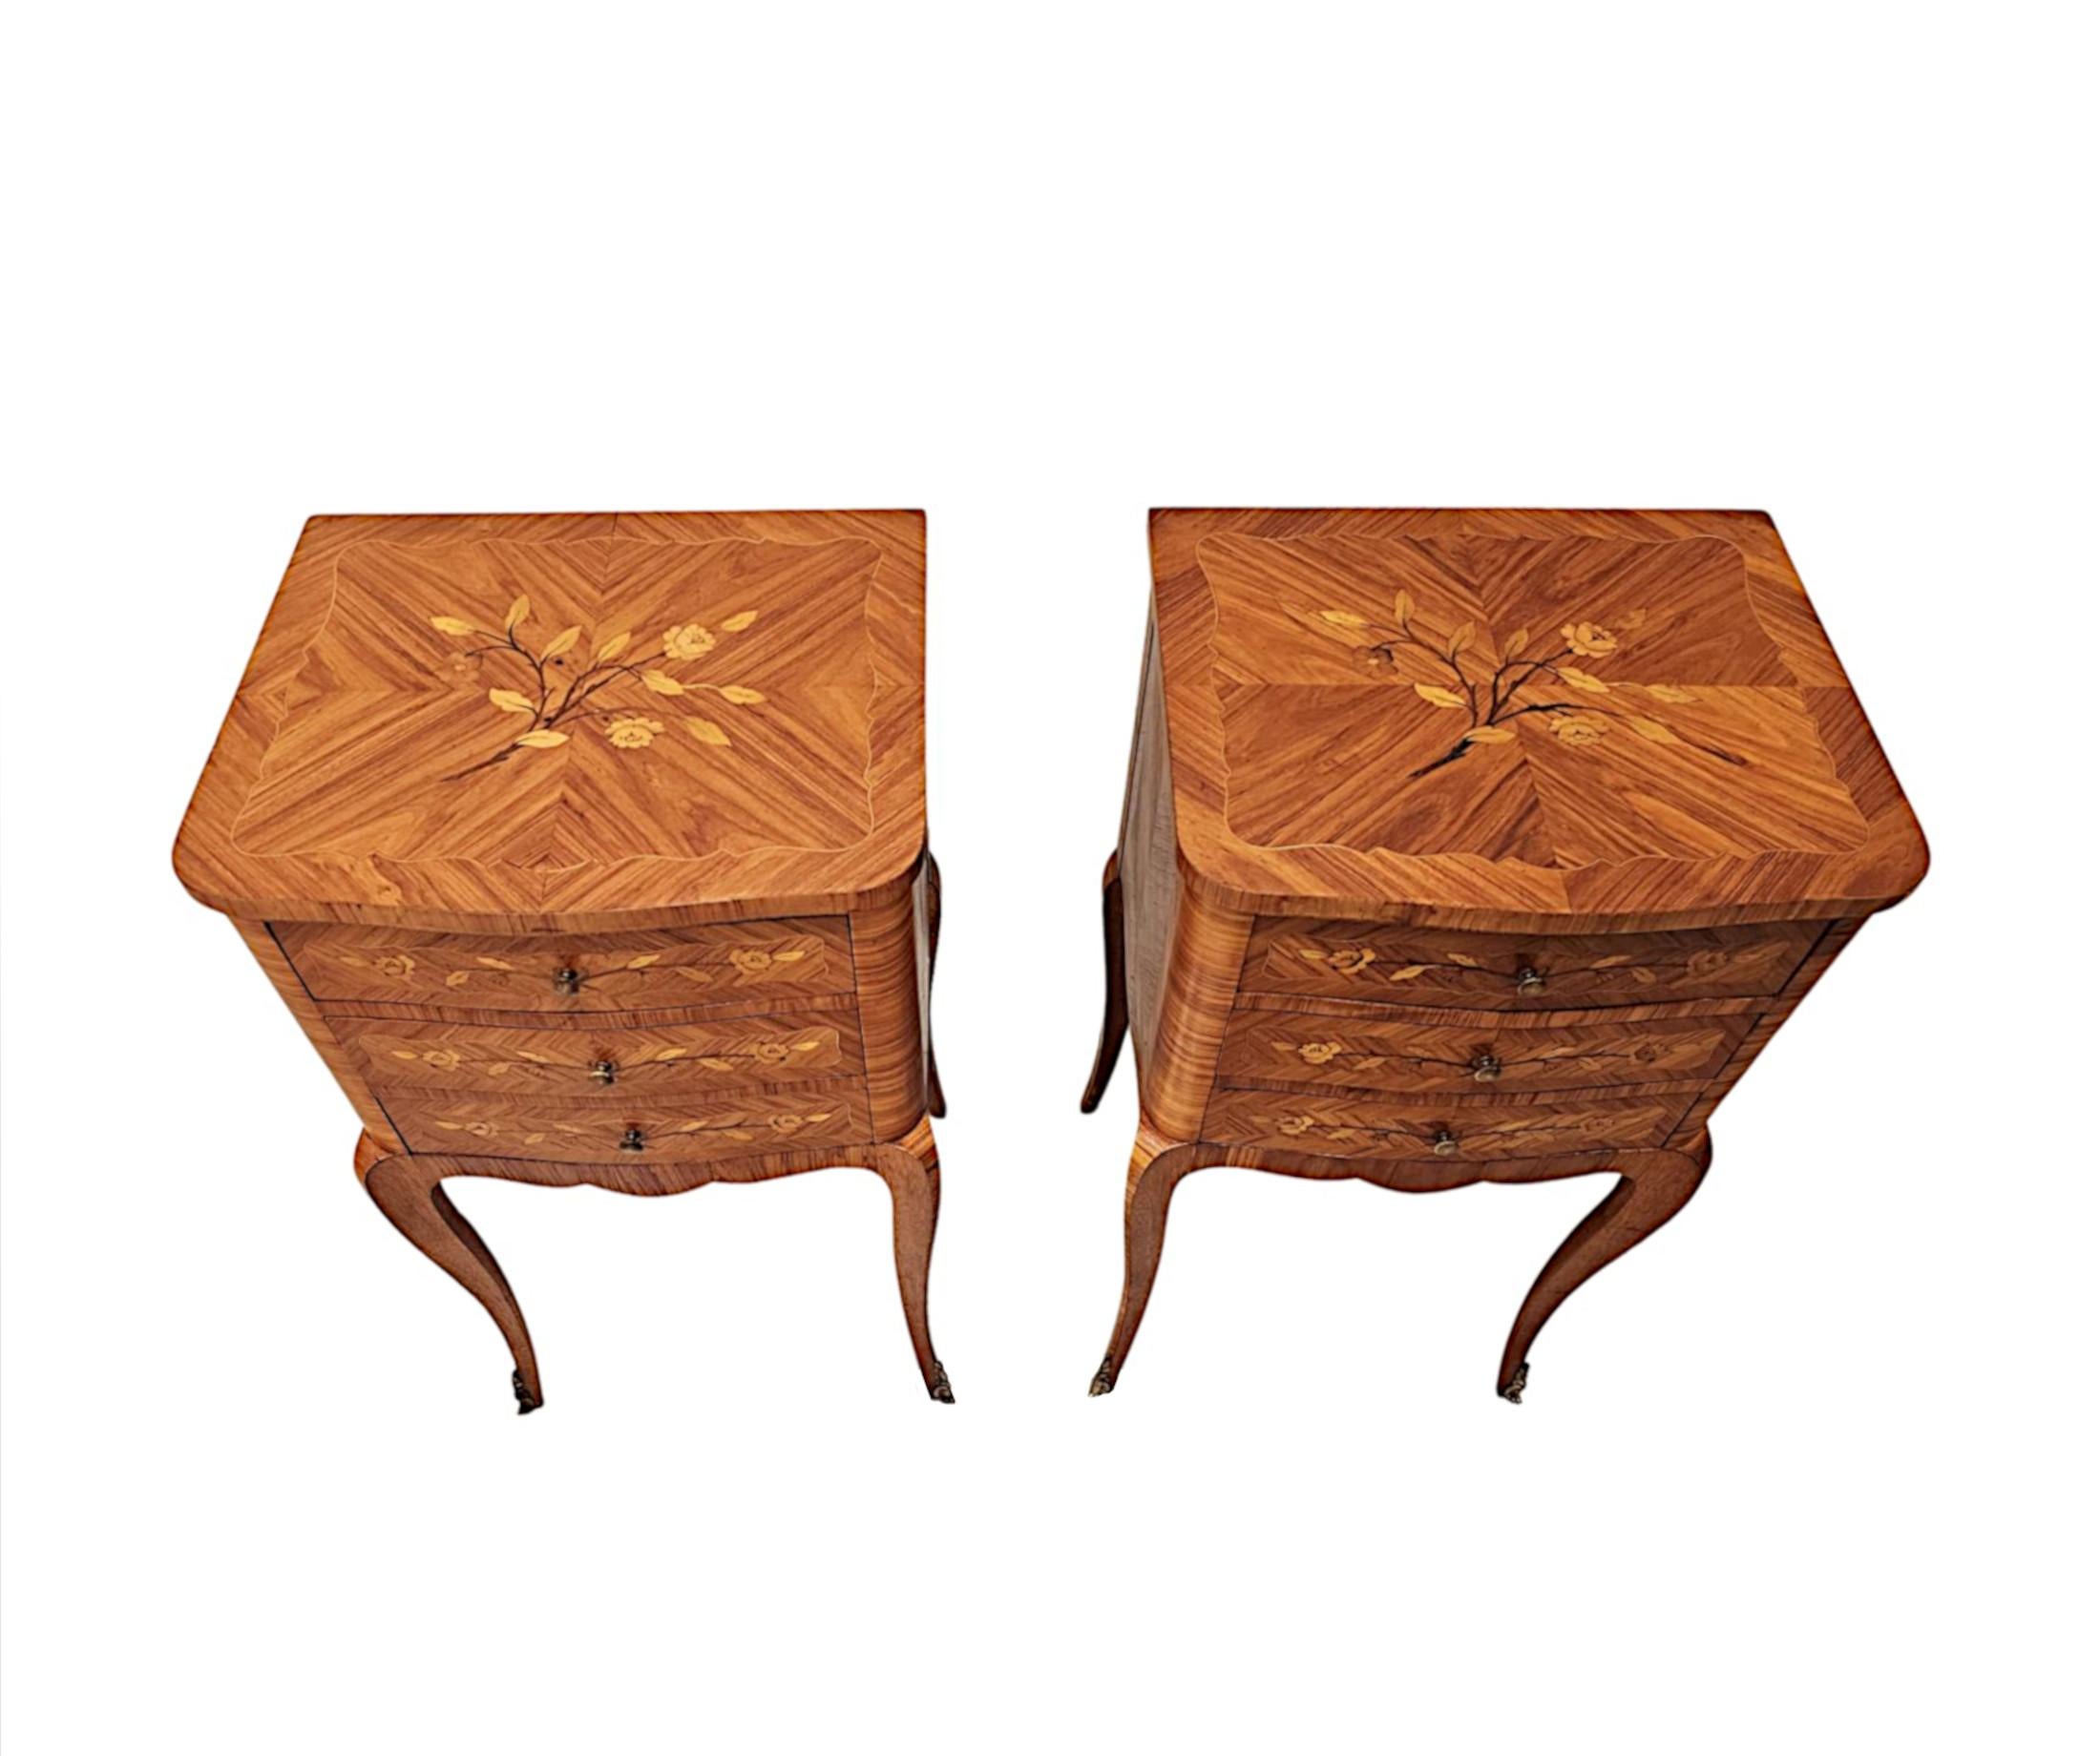 A fabulous pair of early 20th Century richly patinated fruitwood bedside tables or chest of drawers of exceptional quality.  This stunning pair are finely hand carved, crossbanded with delicate line inlay and highly inlaid marquetry panel detail